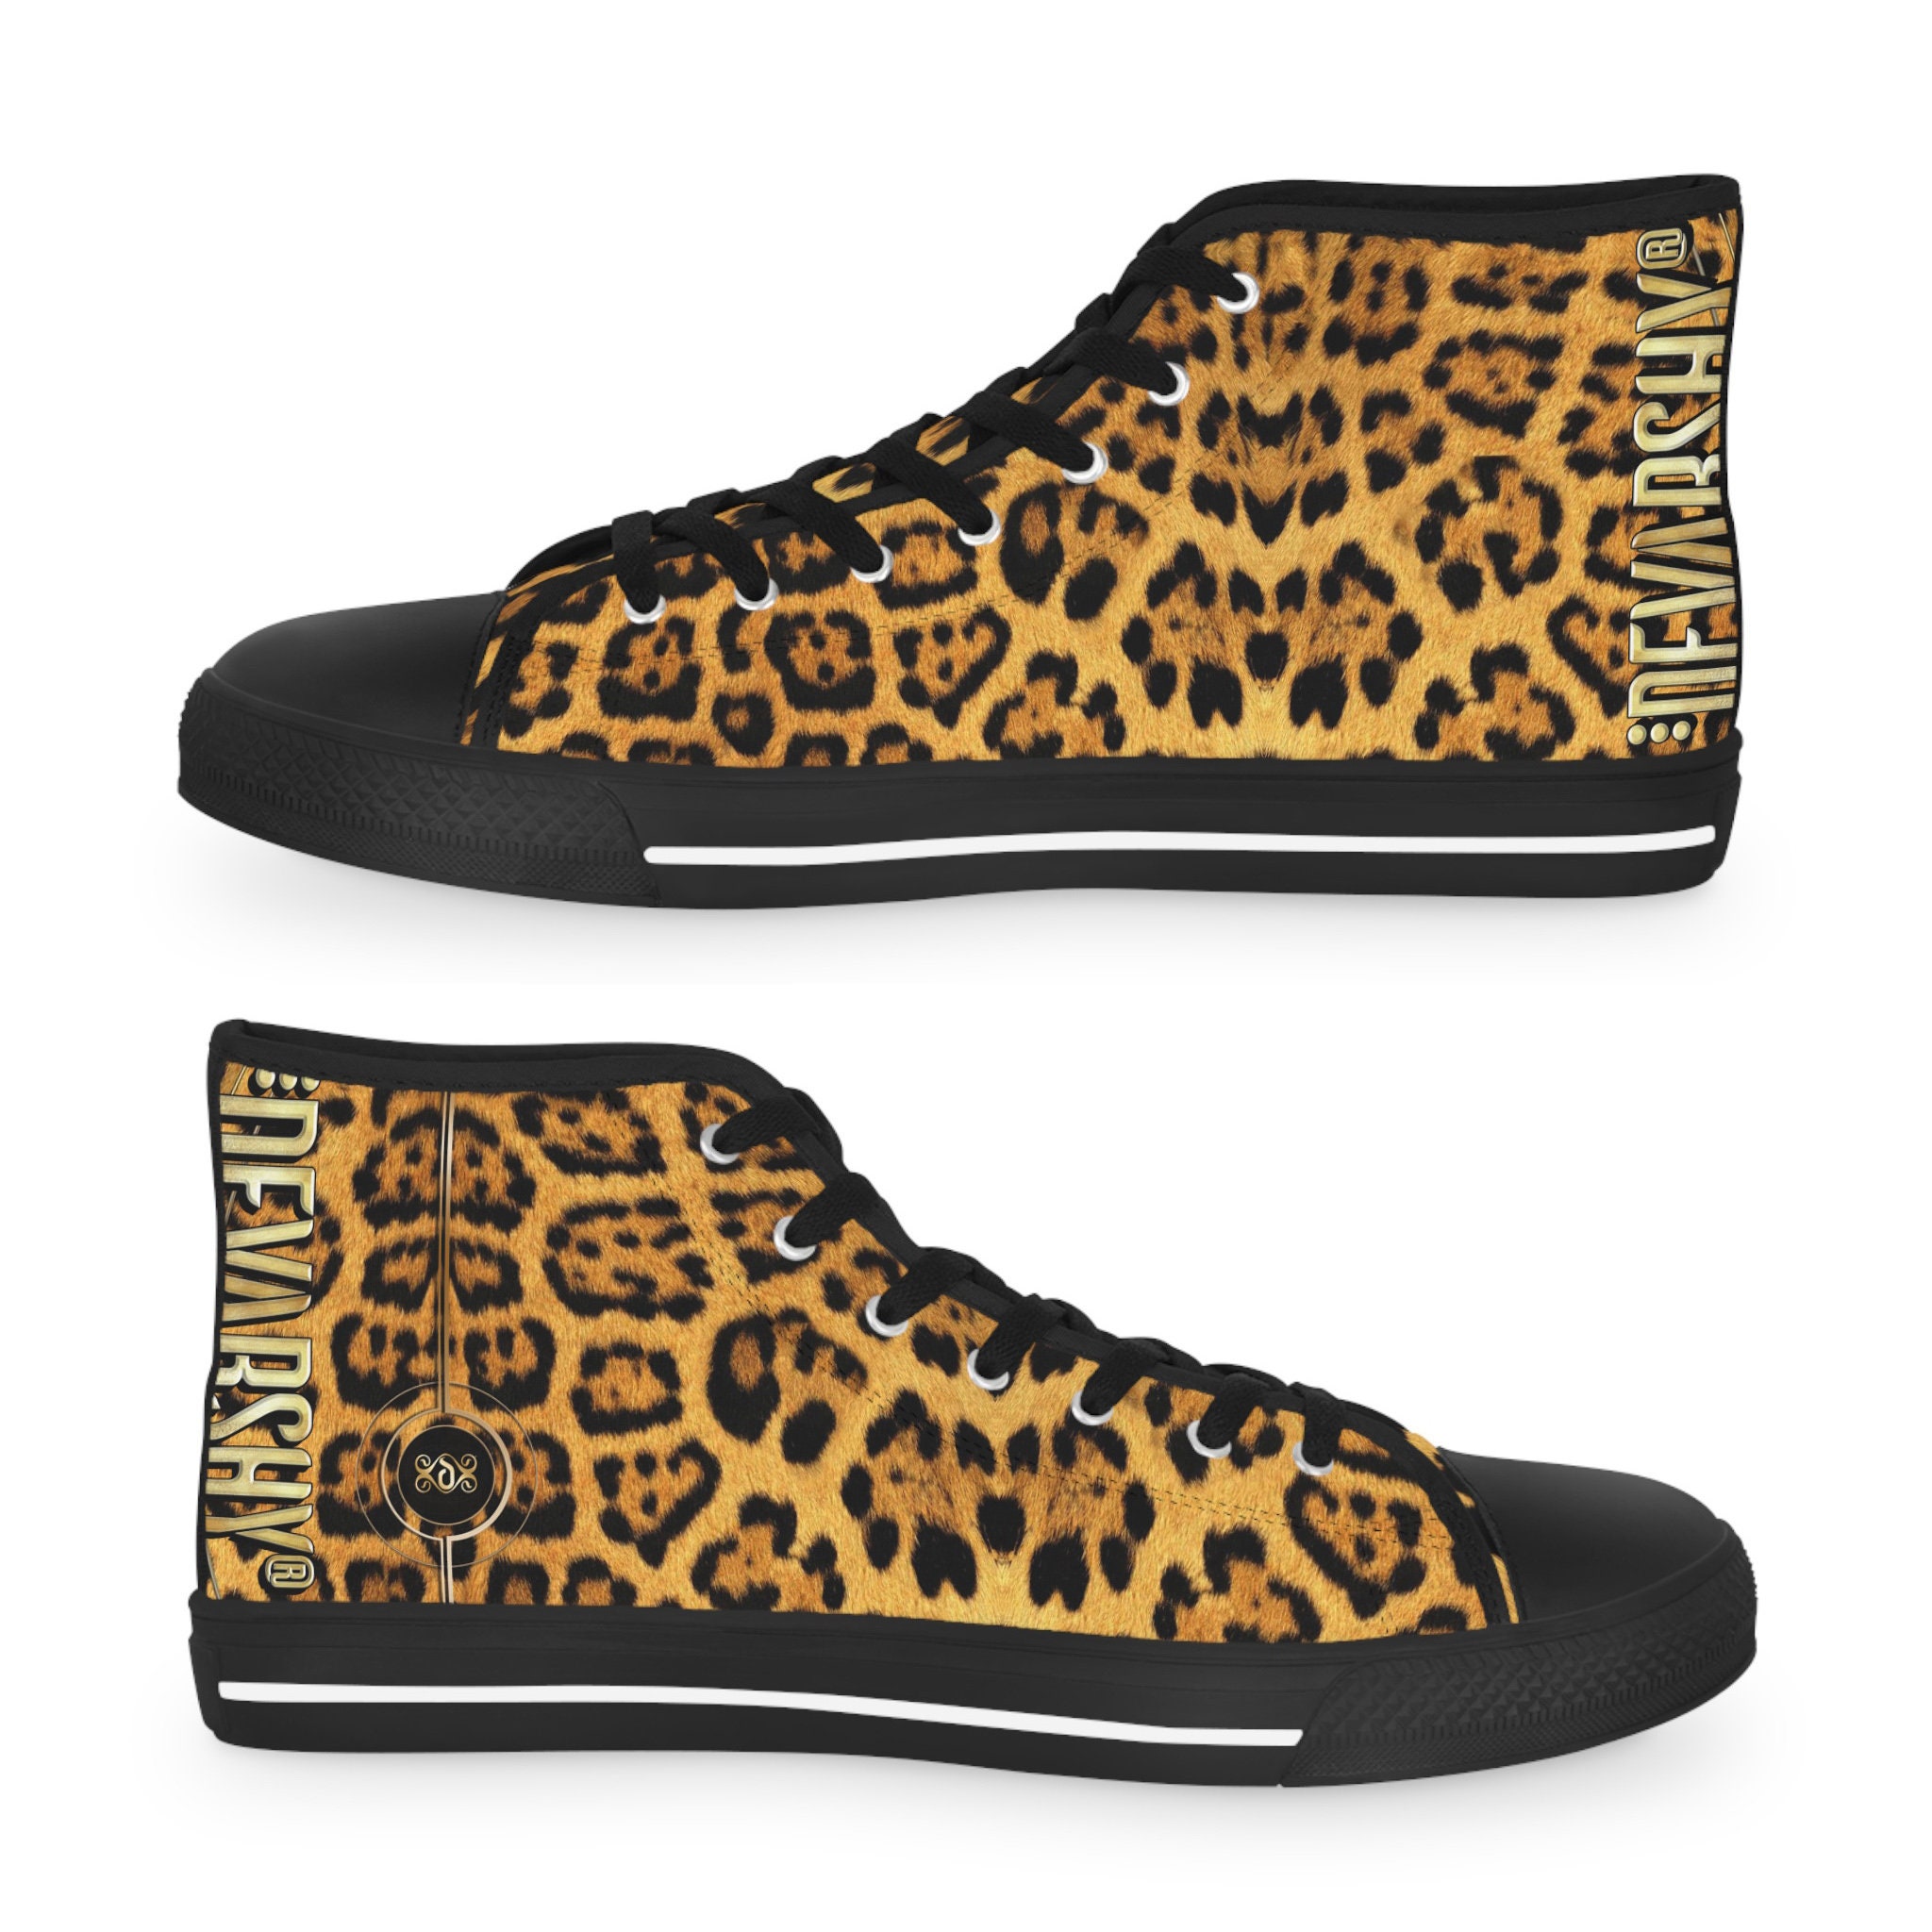 Leopard Print Superstar Sneakers: Mixed Leather, Golden Glitter, Suede  Heel, Do Old Dirty Shoe Mens Casual Shoes Size 36 46 From Loveyoushoe,  $10.37 | DHgate.Com